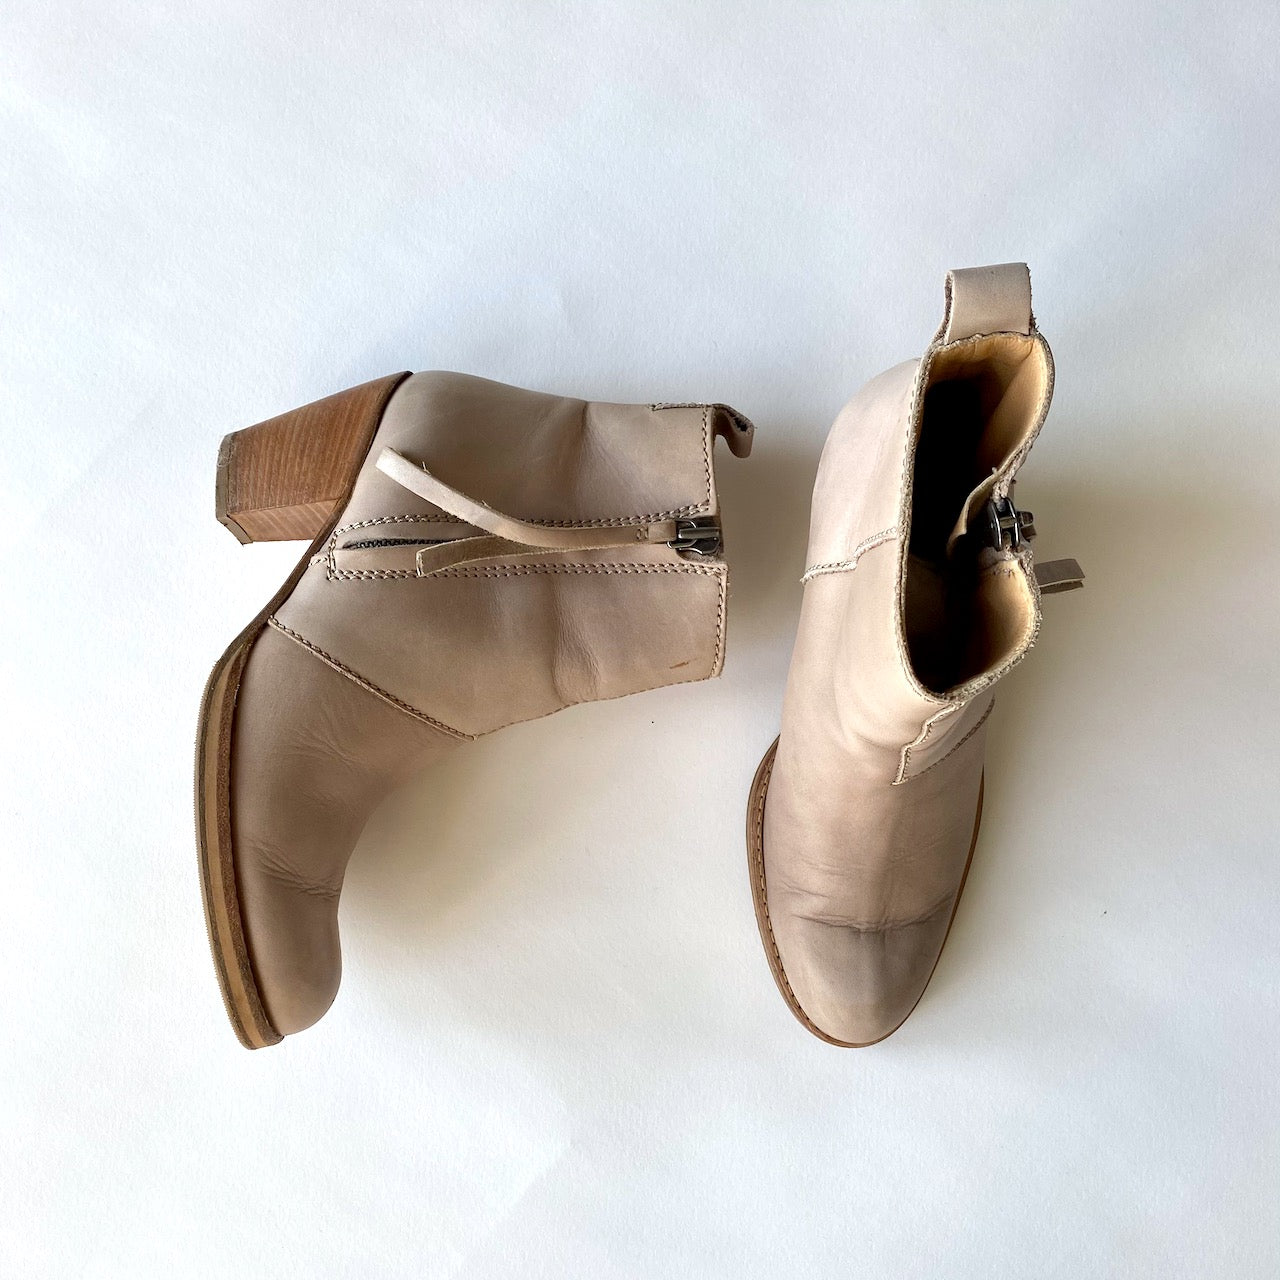 Manifesto Woman Acne Pistol taupe leather ankle boots